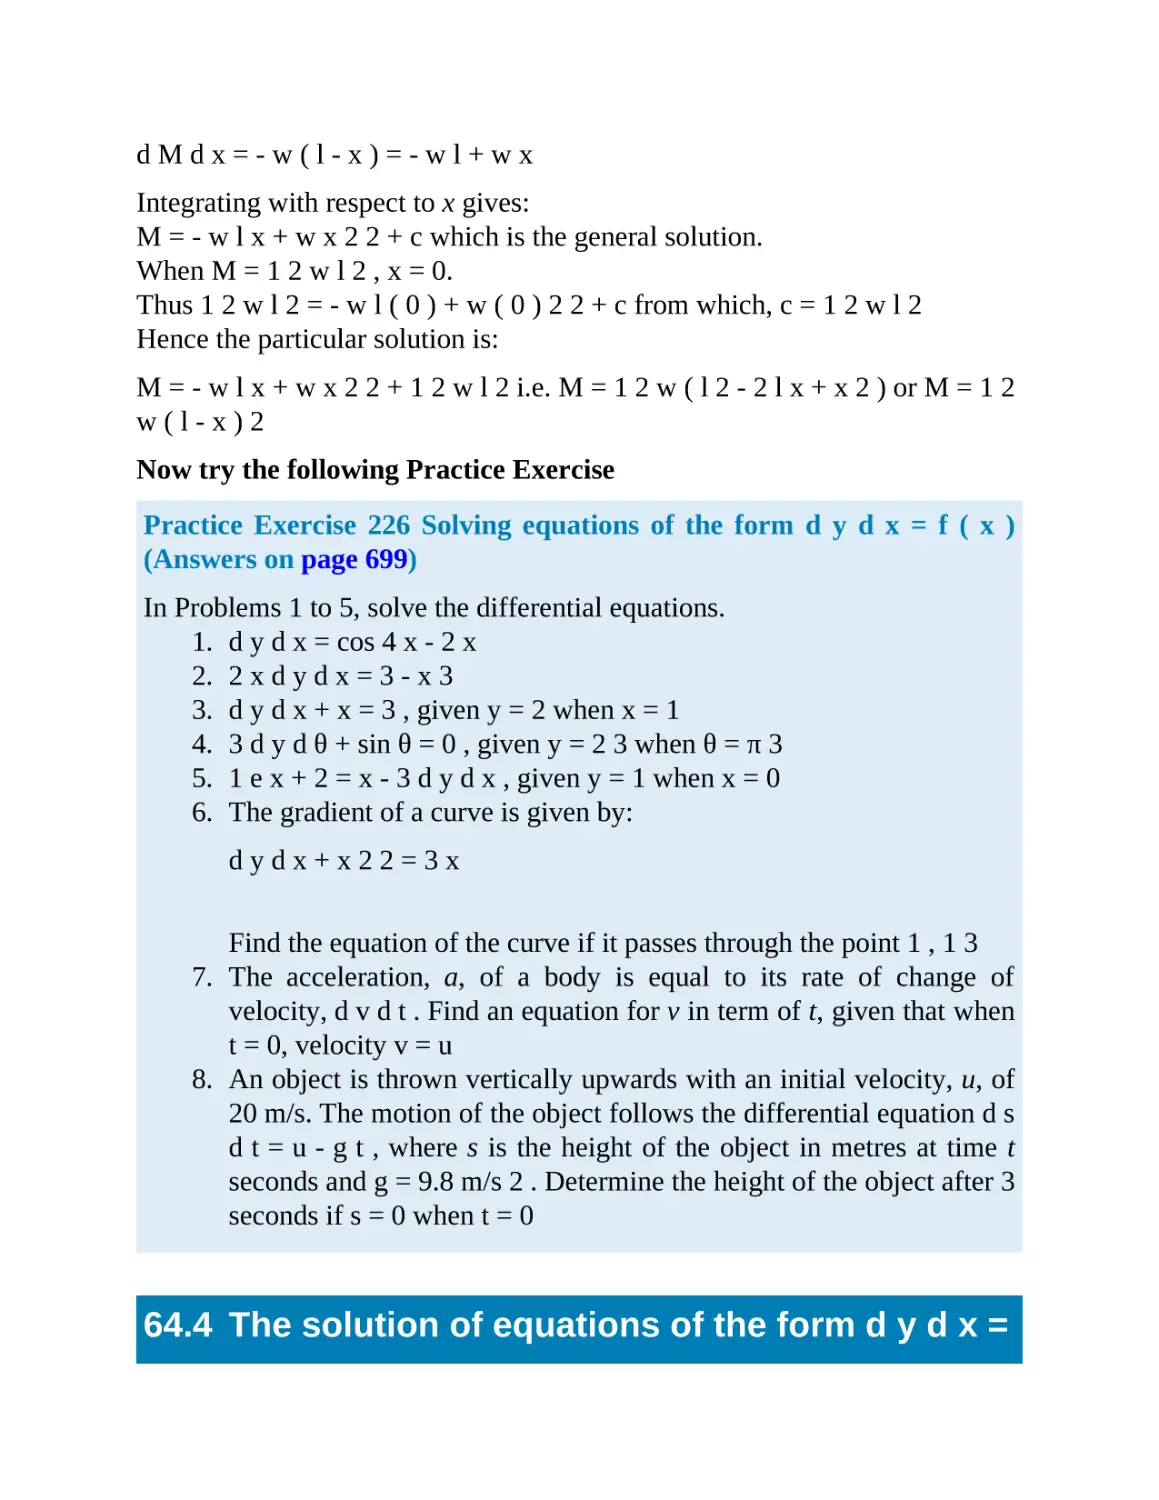 64.4 The solution of equations of the form